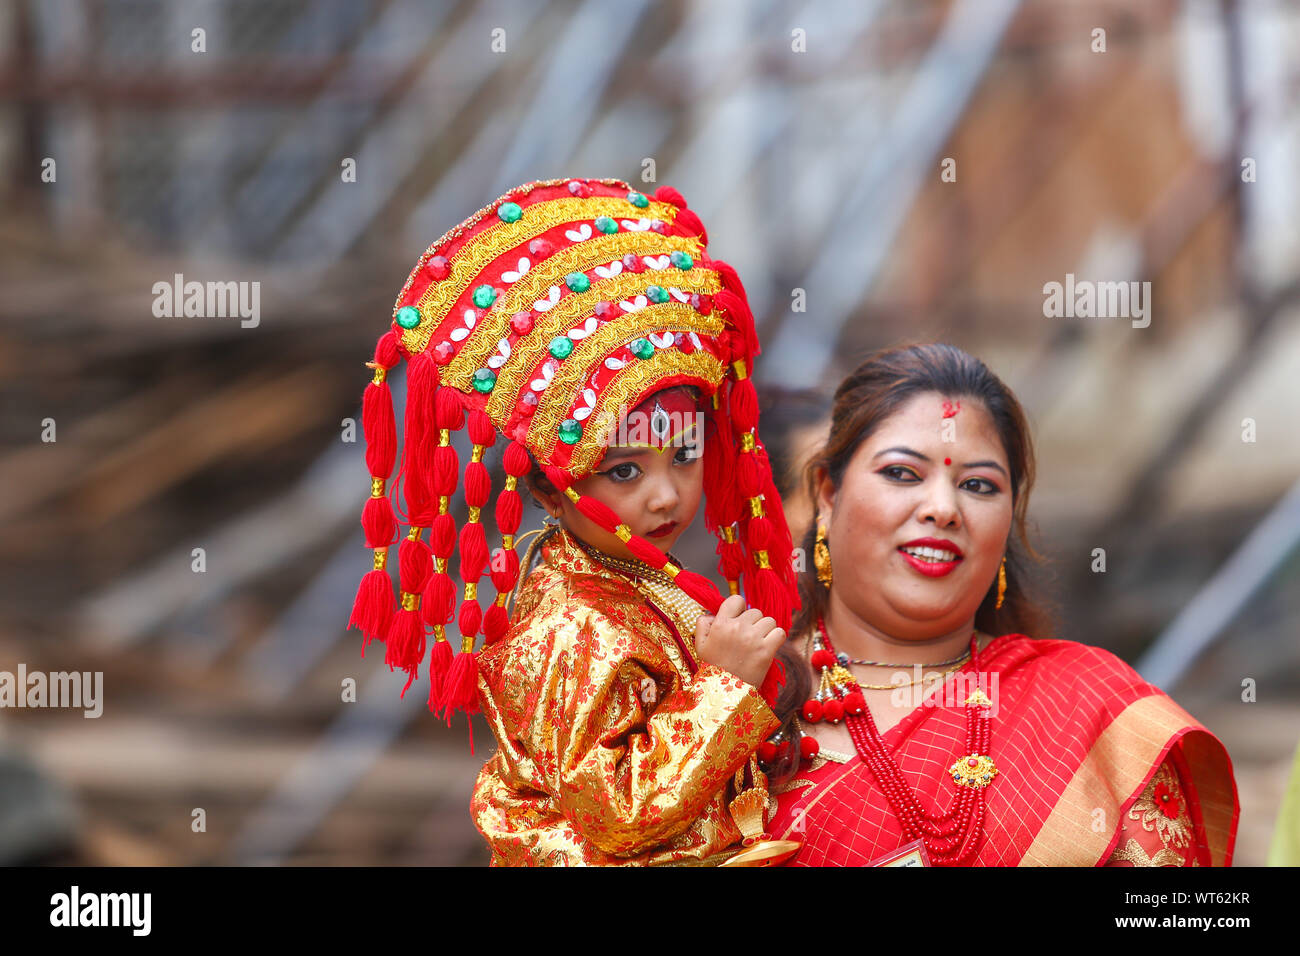 Kathmandu, Nepal. 11th Sep, 2019. A Nepalese girl dressed as a living goddess Kumari is carried by her mother during the rituals.Kumari puja is a tradition of worshipping young prepubescent girls as manifestations of the divine female energy. The ritual holds a strong religious significance in the Newar community that seeks divine blessings to save small girls from diseases and bad luck in the years to come. Credit: SOPA Images Limited/Alamy Live News Stock Photo